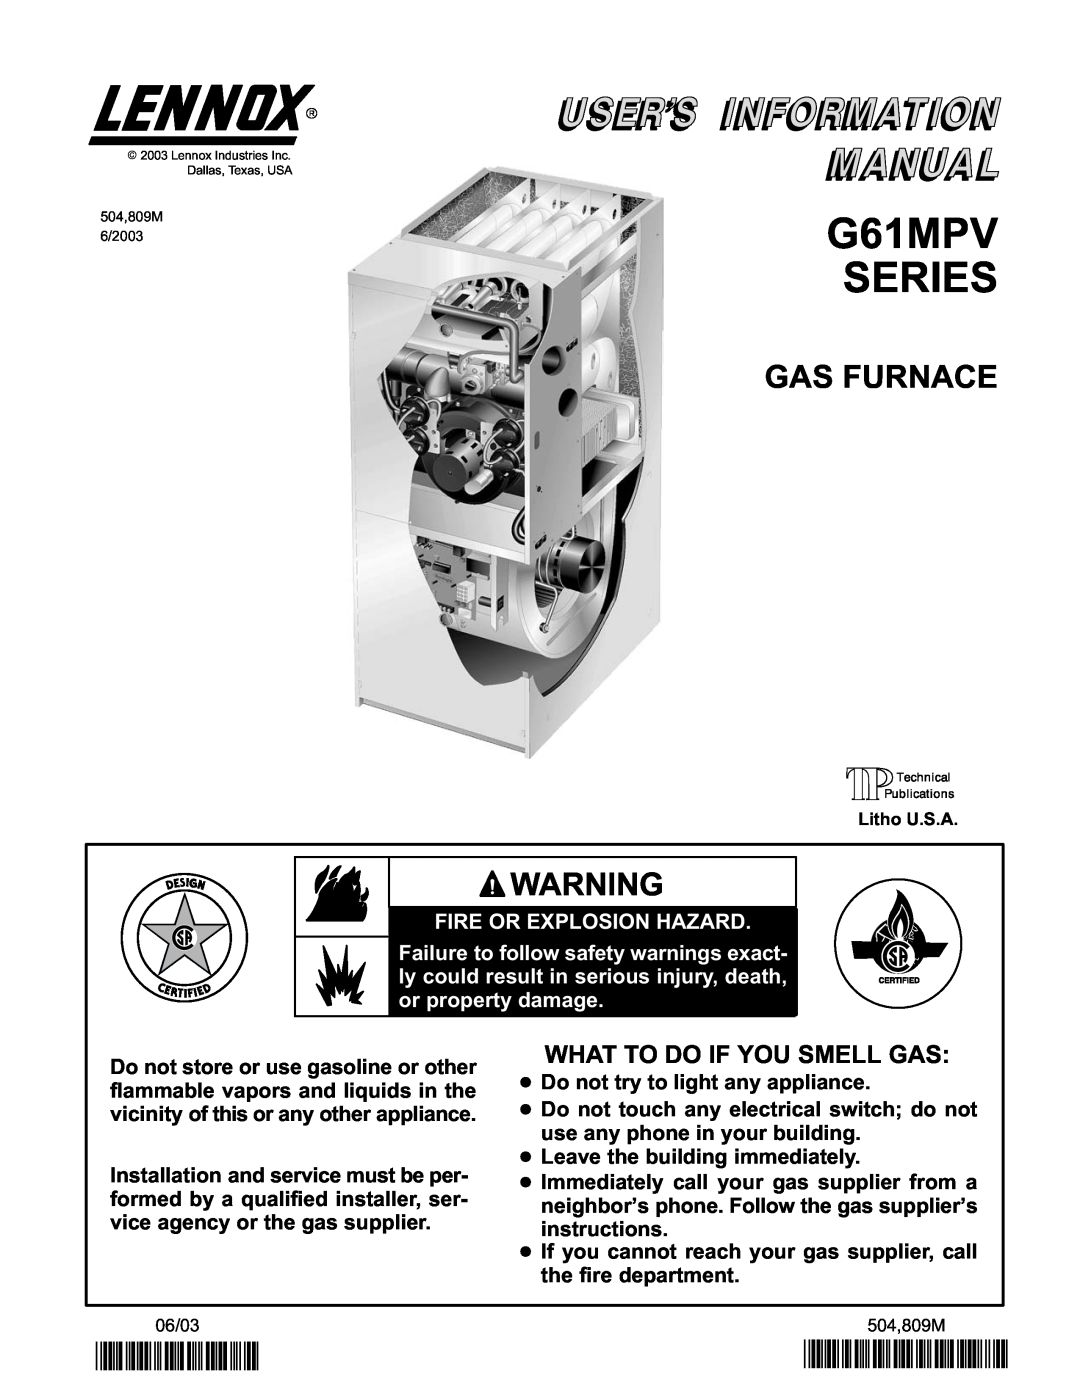 Lenoxx Electronics manual G61MPV SERIES, Gas Furnace, 2P0603, P504809M, What To Do If You Smell Gas 